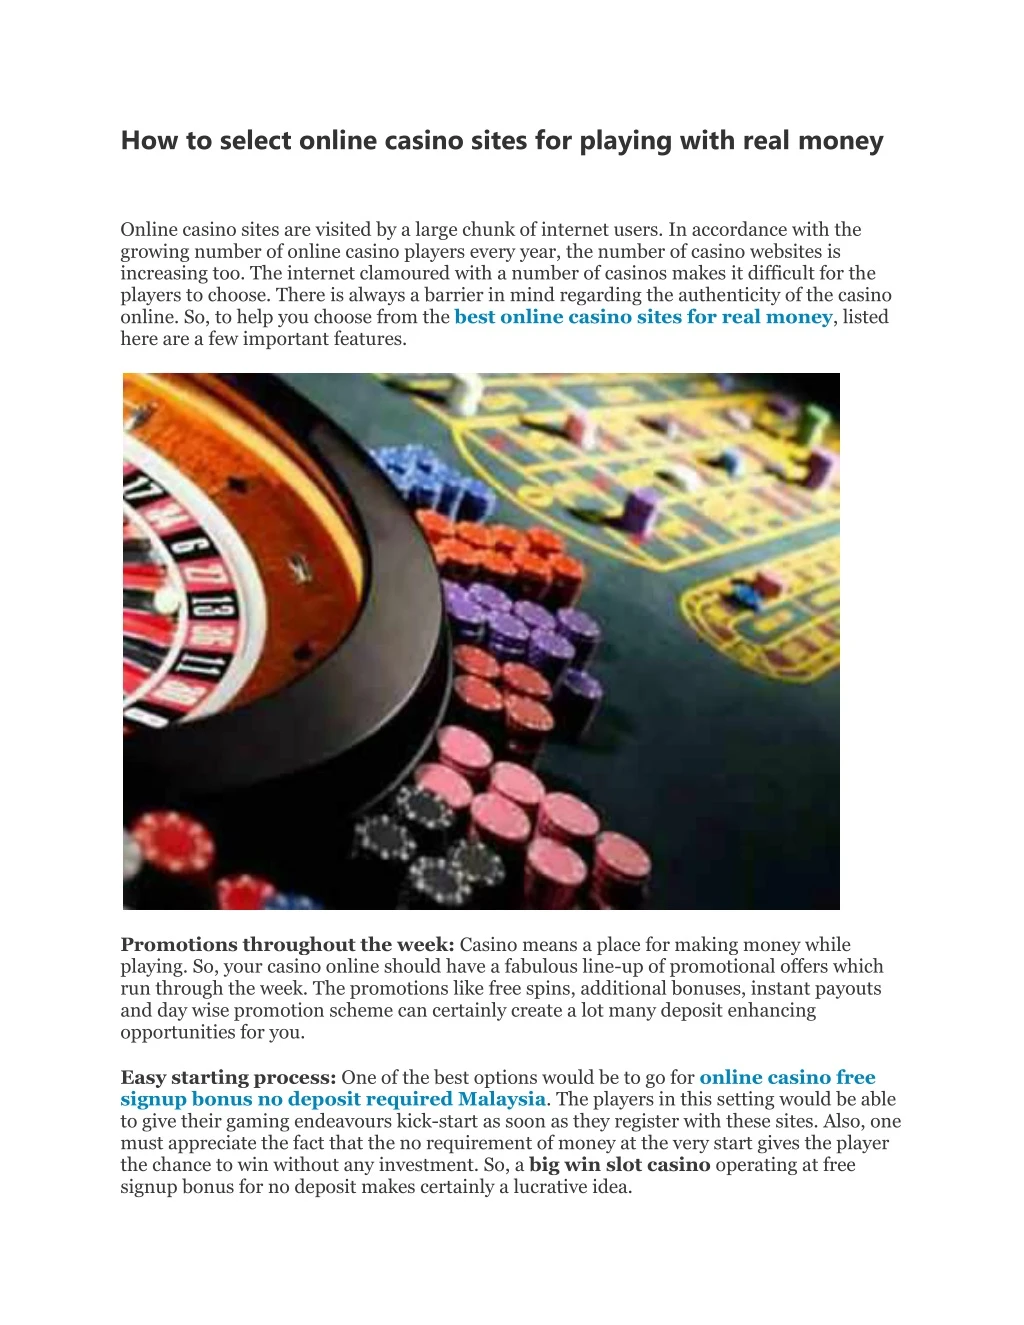 how to select online casino sites for playing